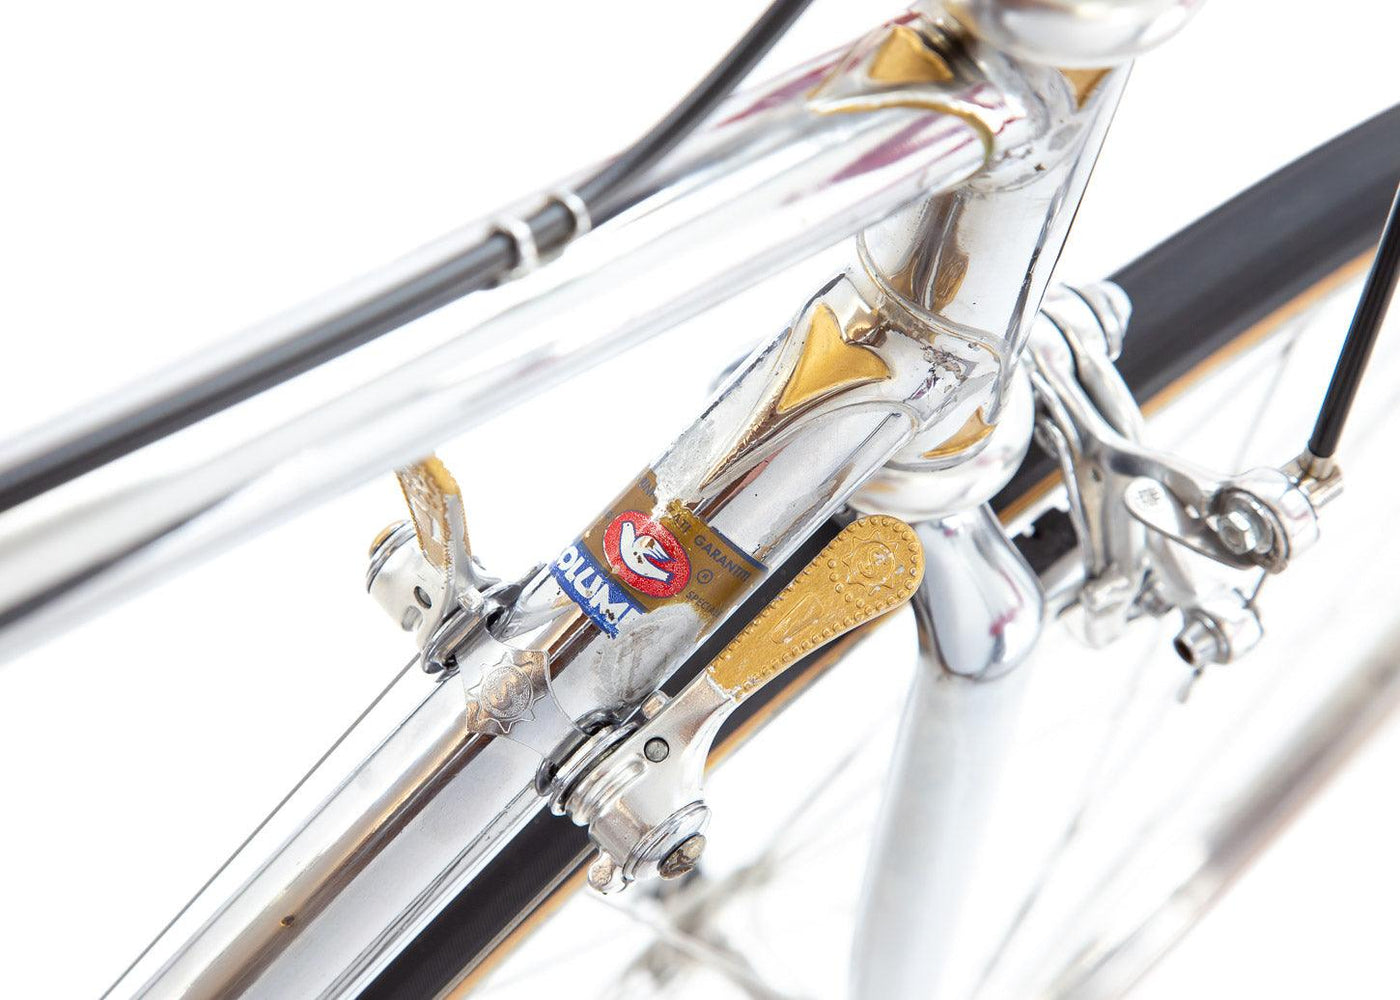 Chromed Classic French Road Bicycle 1980s - Steel Vintage Bikes